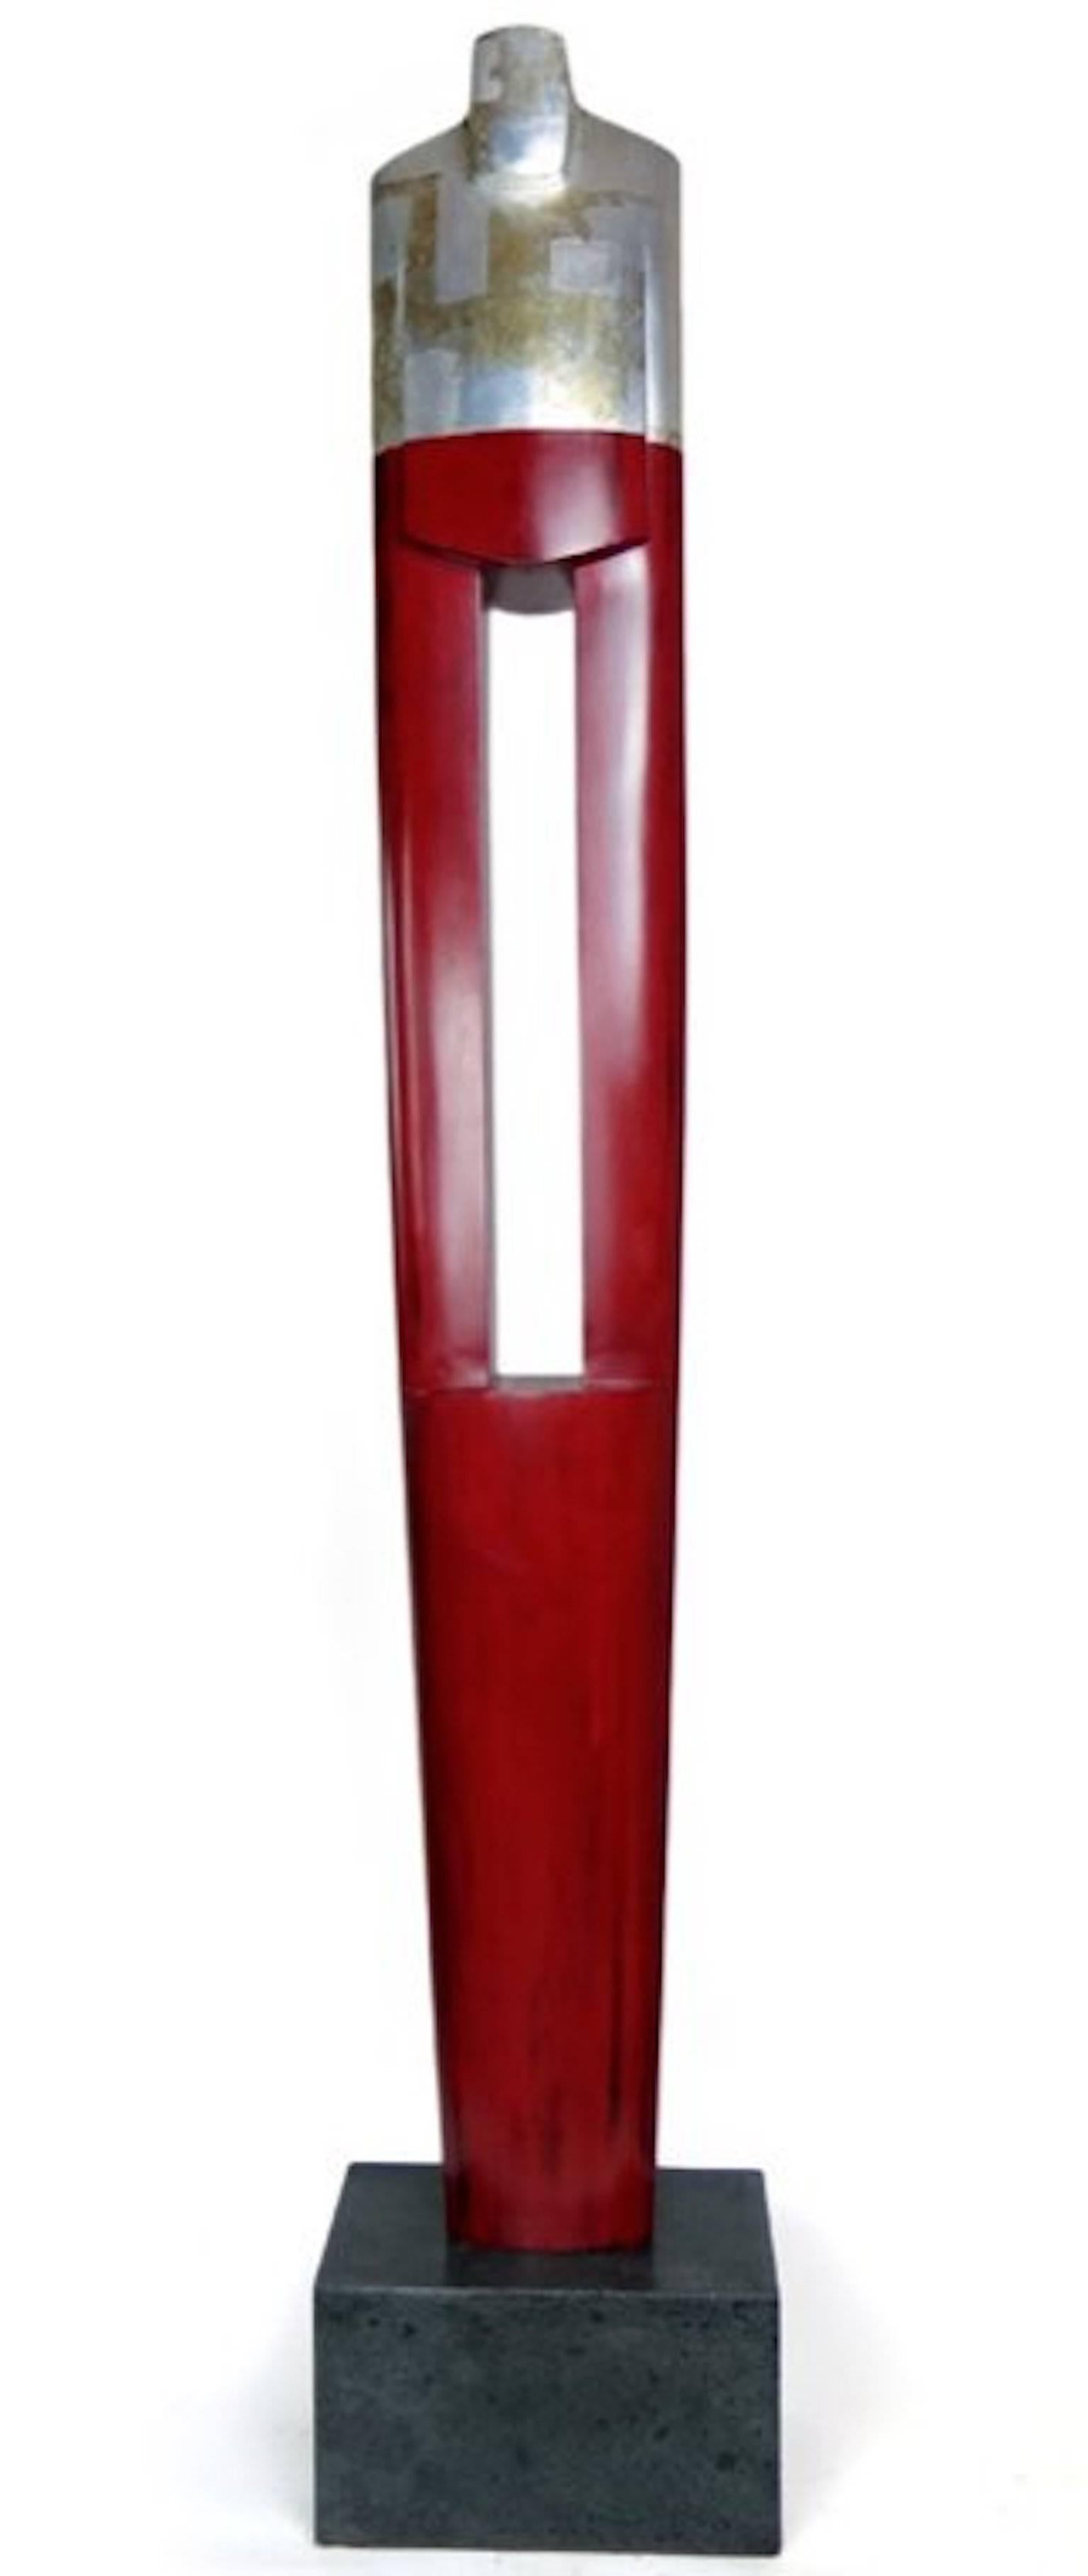 Joel Urruty Abstract Sculpture - Red and Silver Guardian 